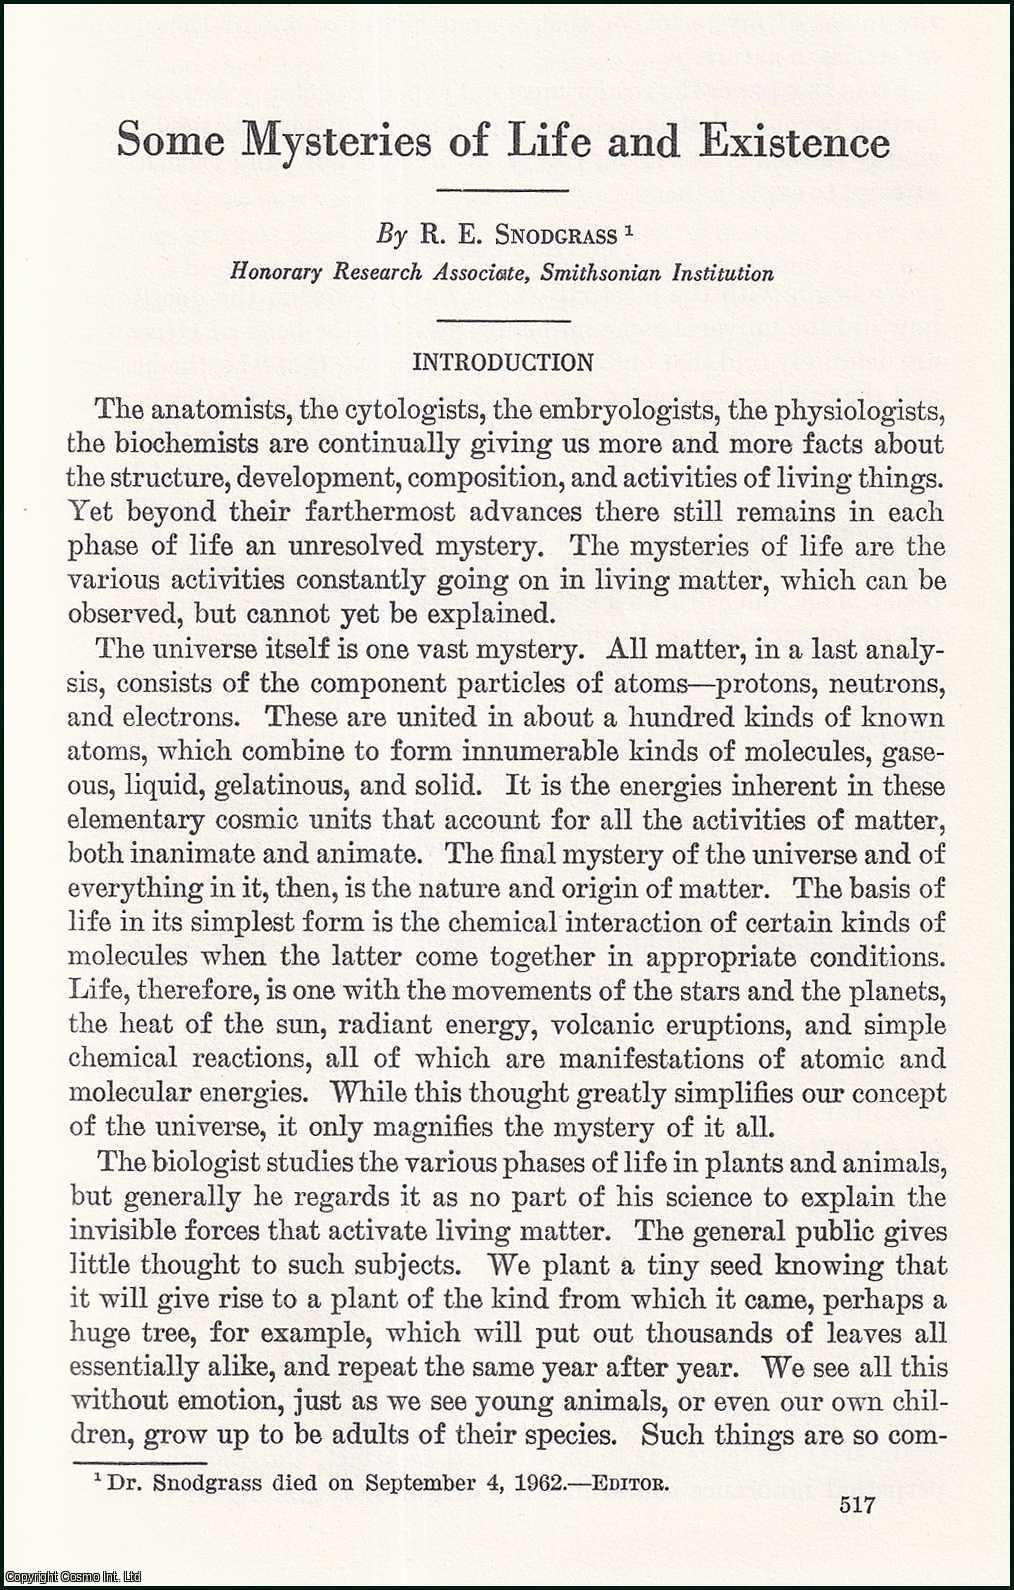 R.E. Snodgrass, Honorary Research Associate, Smithsonian Institution. - Some Mysteries of Life & Existence : the Origin of Life ; Cell Division ; Reproduction ; Heredity ; Cell Movements & Instinct. An uncommon original article from the Report of the Smithsonian Institution, 1962.